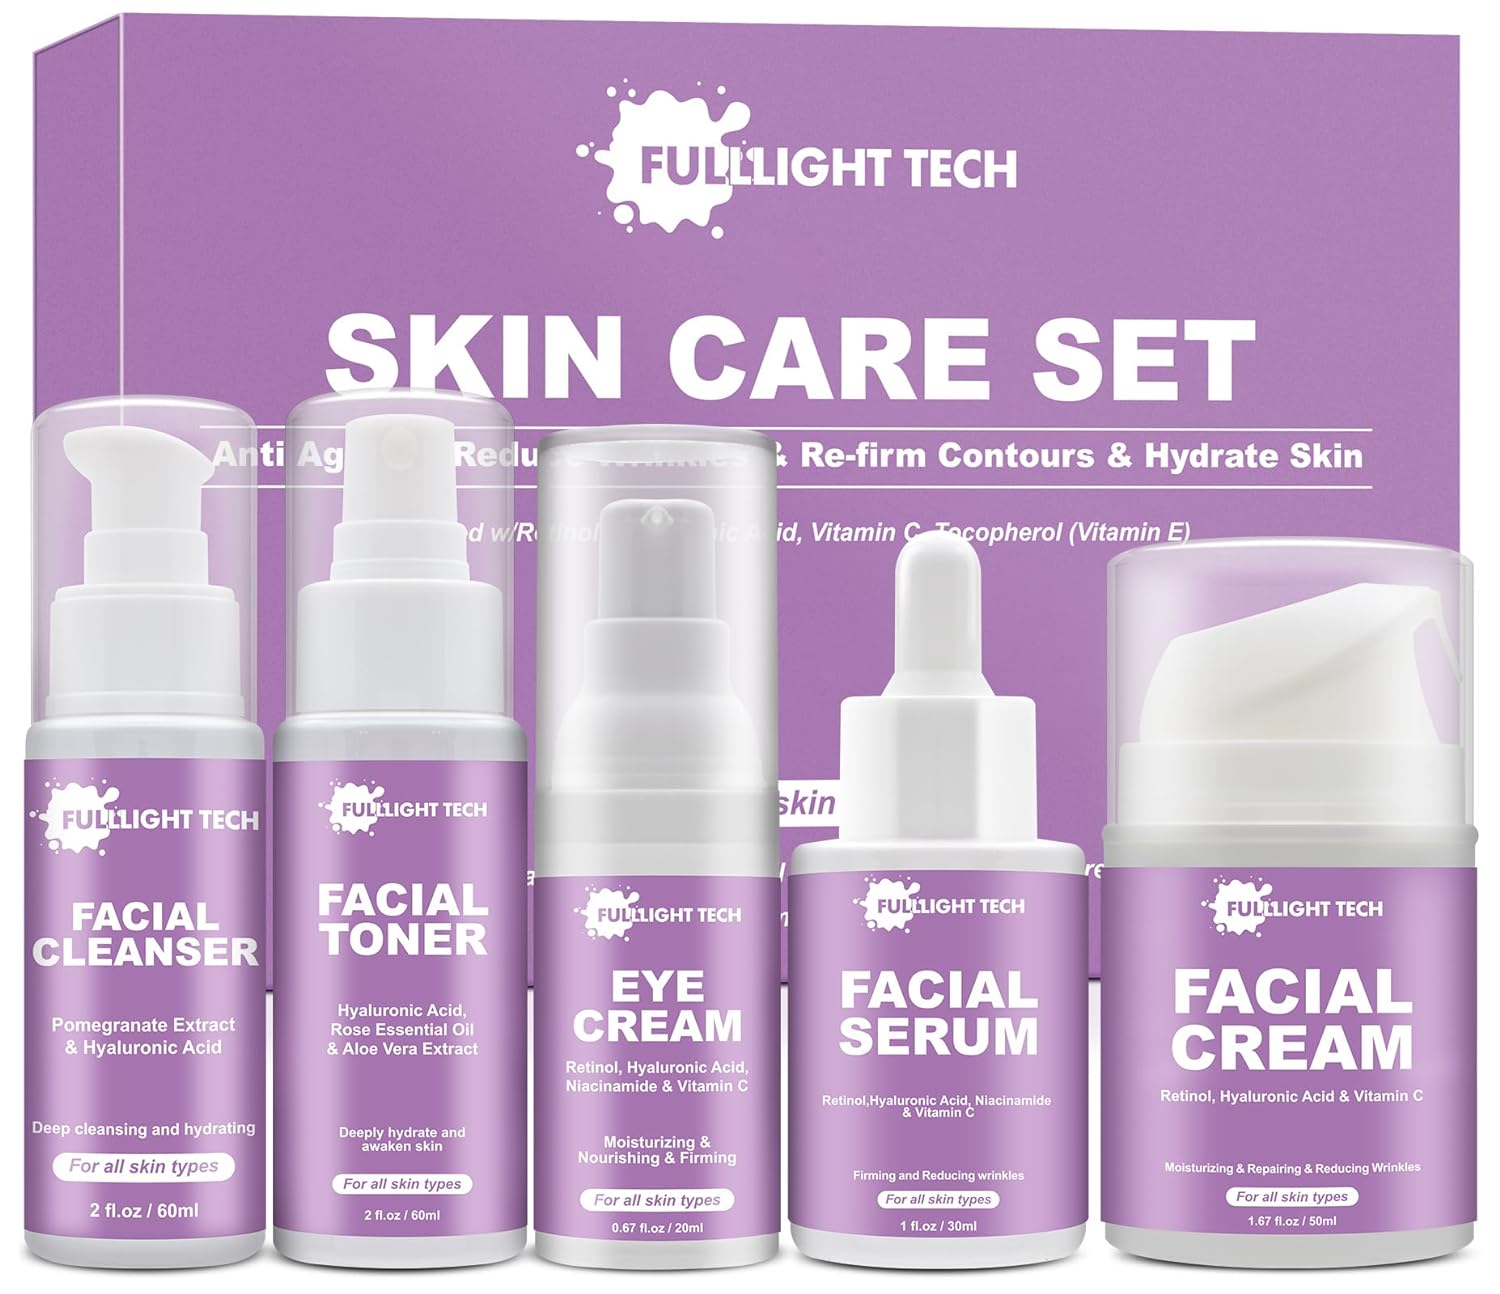 Gifts for Women,Anti Aging Skin Care Routine Kit,Reduce Wrinkles  Hydrate Skin,Facial Cleanser,Toner,Cream,Serum,Eye Cream Skincare Gift Set,Wife Mom Womens Gifts for Christmas Stocking Stuffers